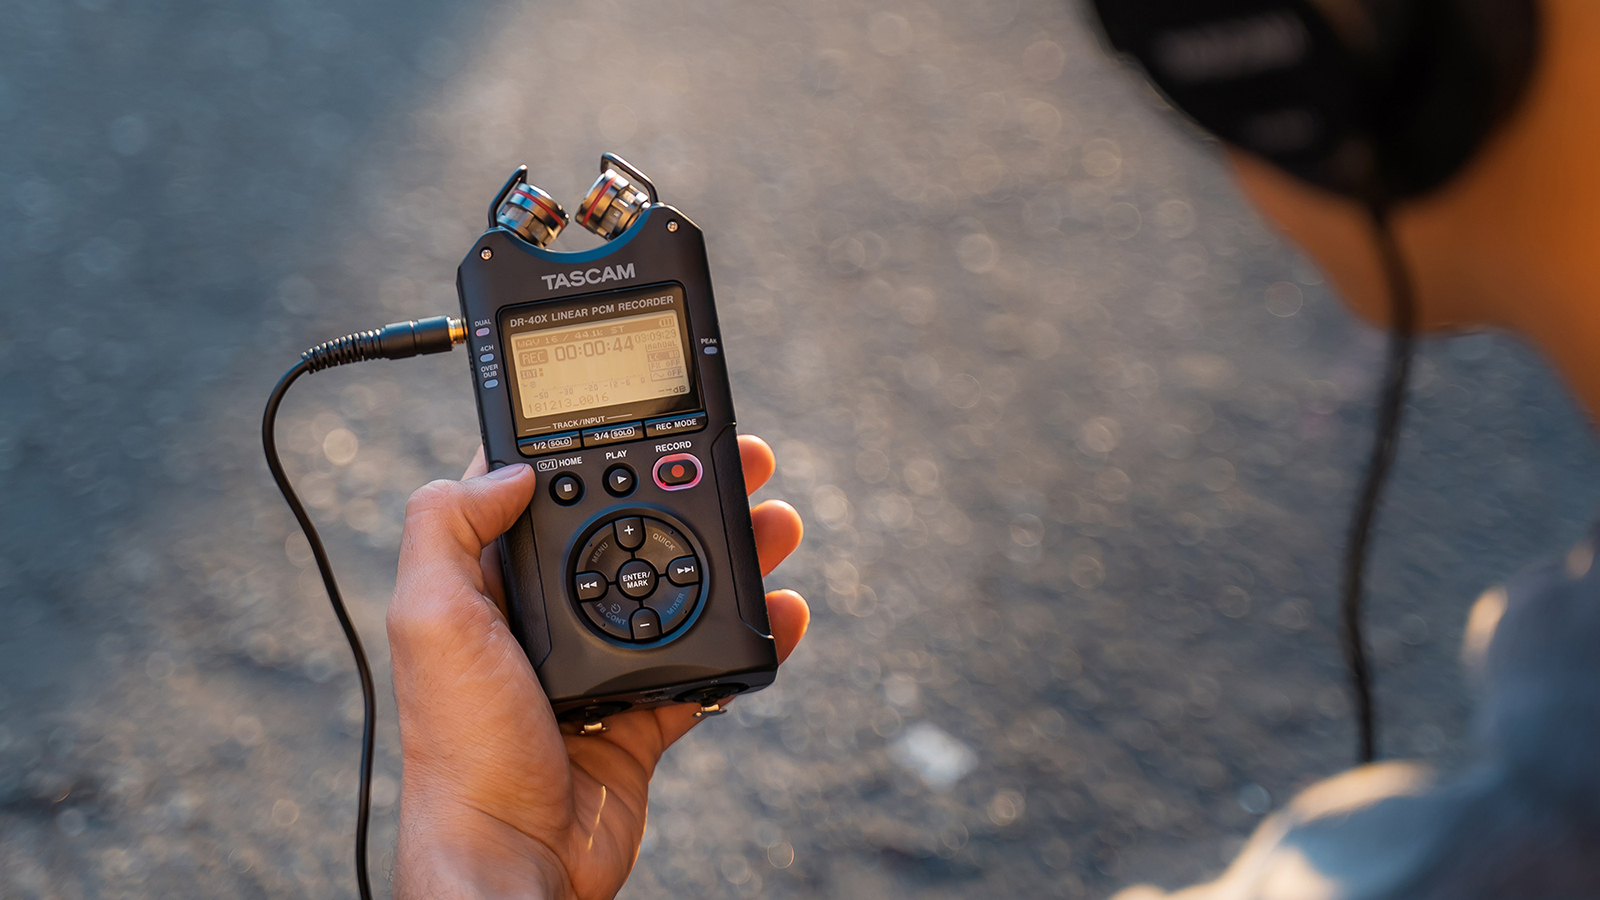 DR-40X | 4-CHANNEL PORTABLE HANDHELD FIELD RECORDER WITH USB 